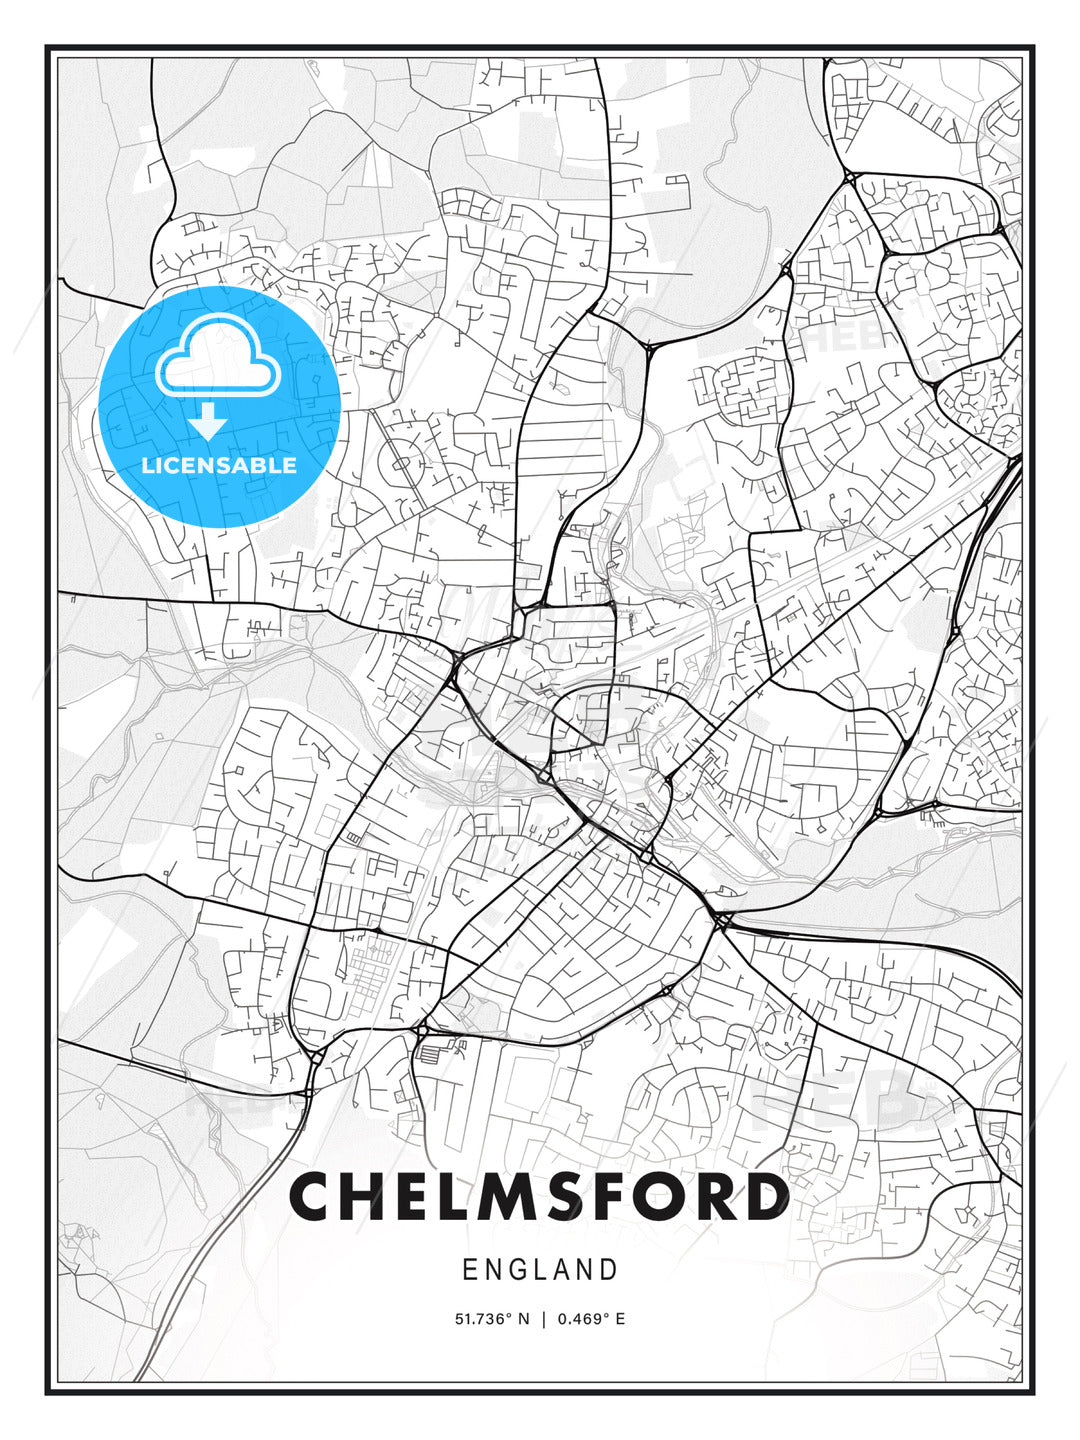 Chelmsford, England, Modern Print Template in Various Formats - HEBSTREITS Sketches